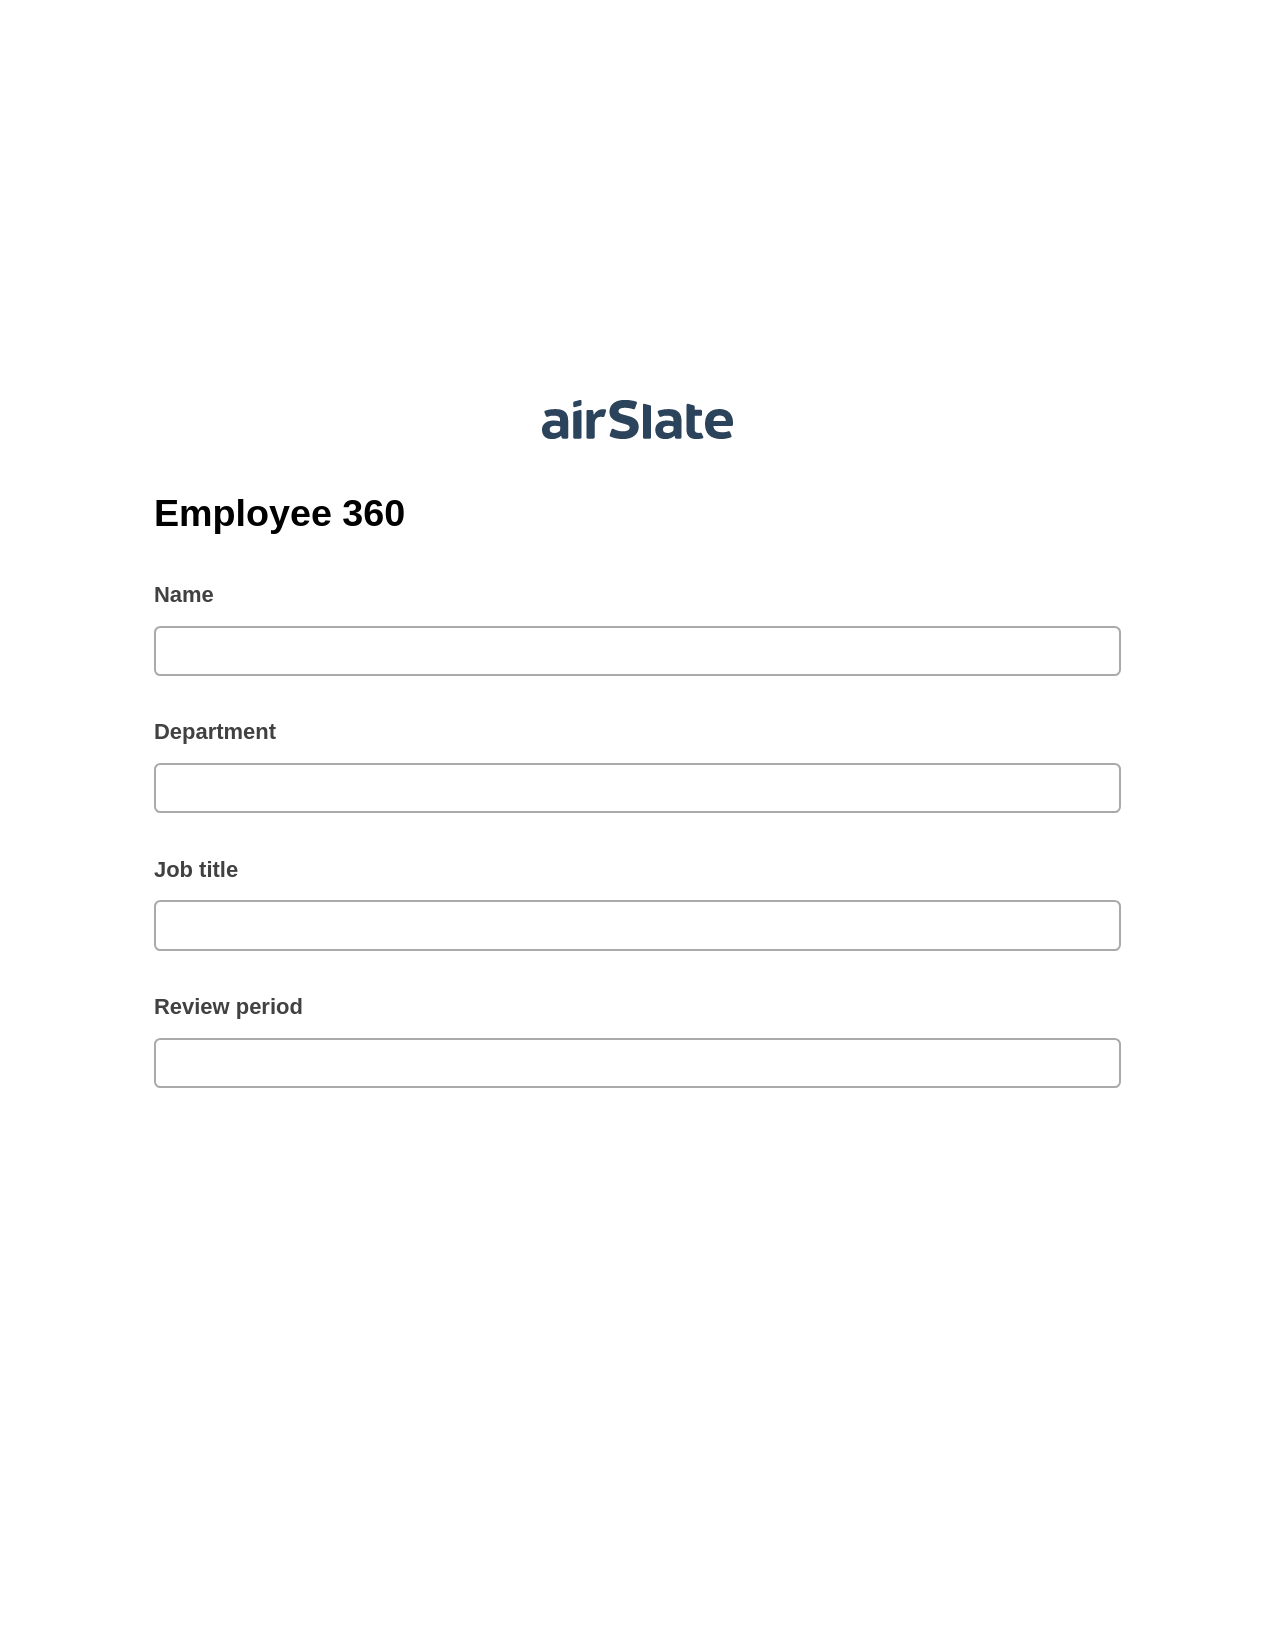 Employee 360 Pre-fill from CSV File Bot, Jira Bot, Export to NetSuite Bot